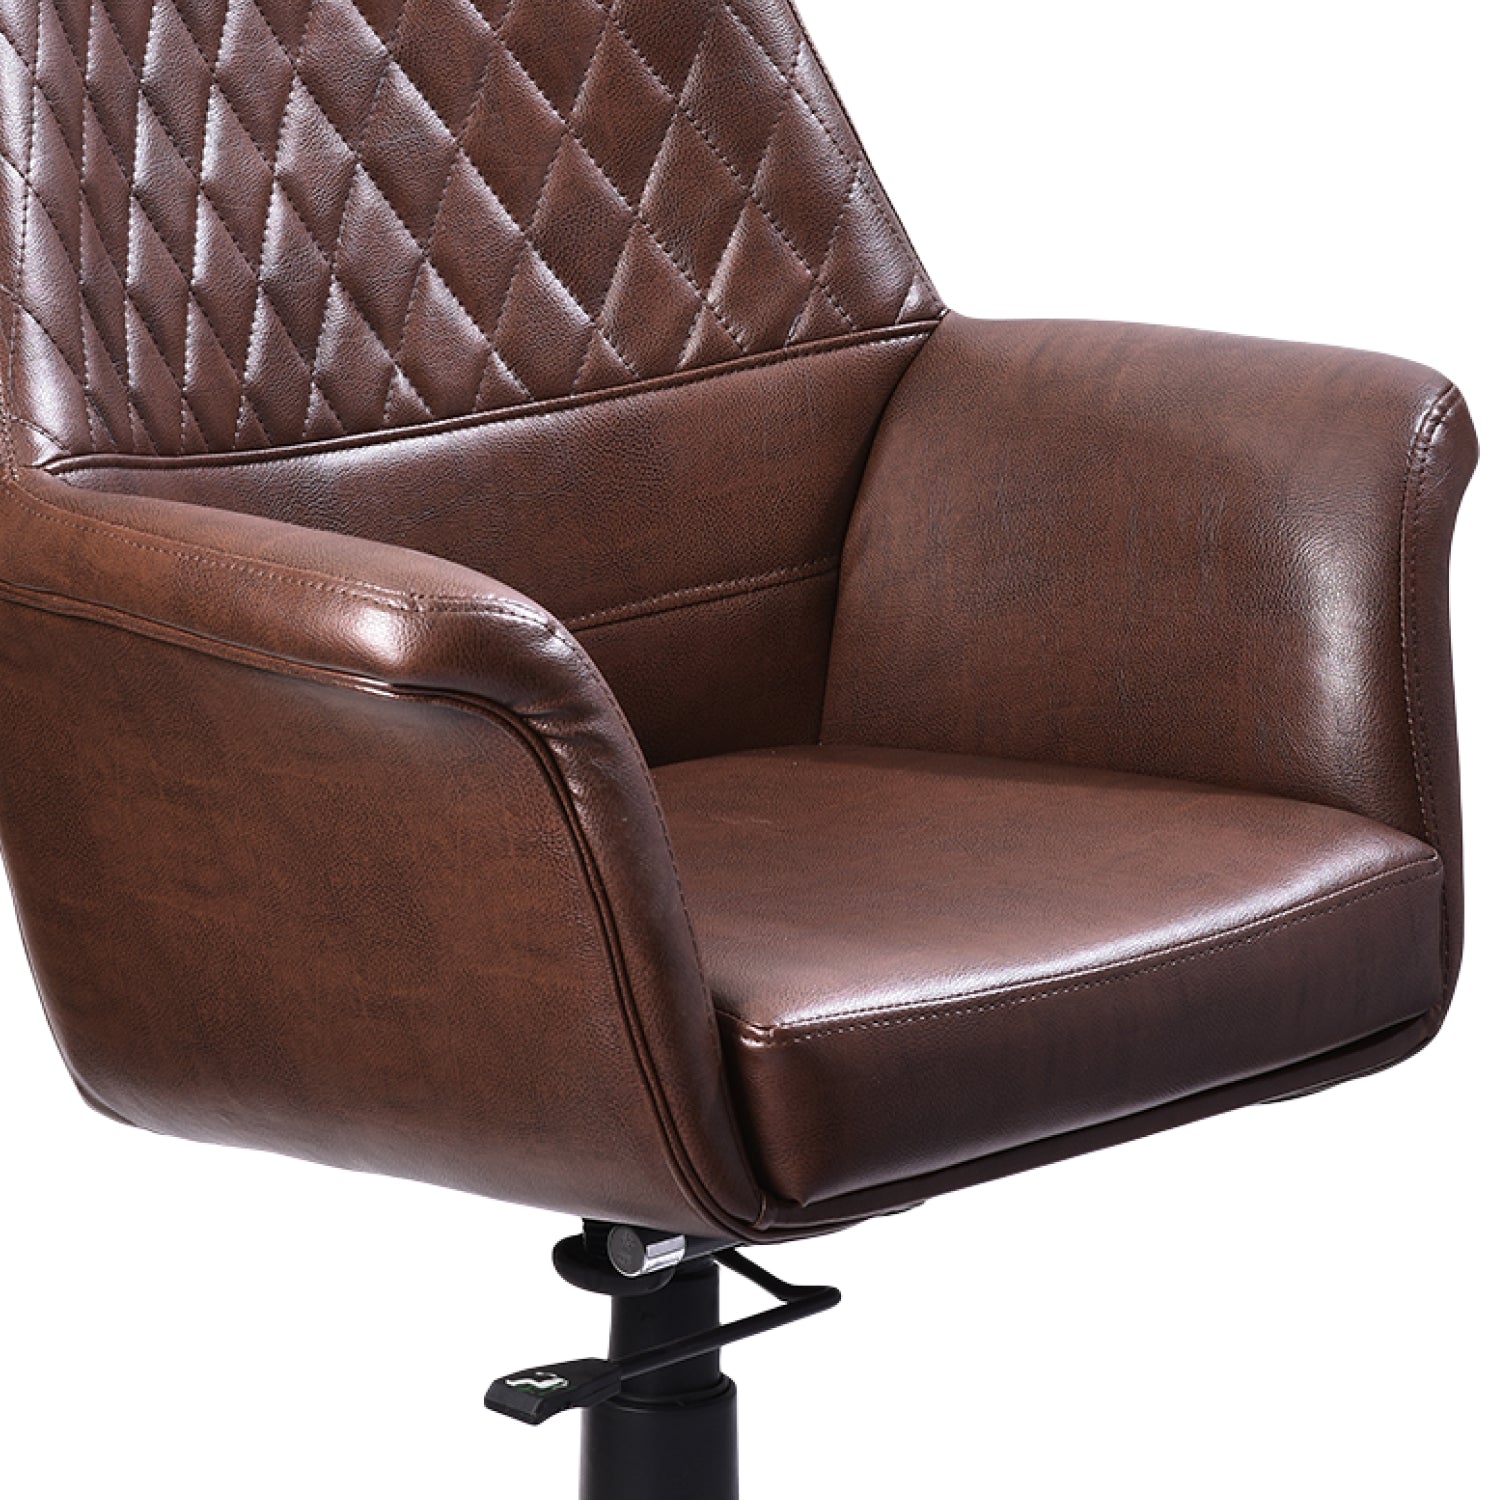 ZFB1006 Medium Back Chair by Zorin in Brown Color Zorin